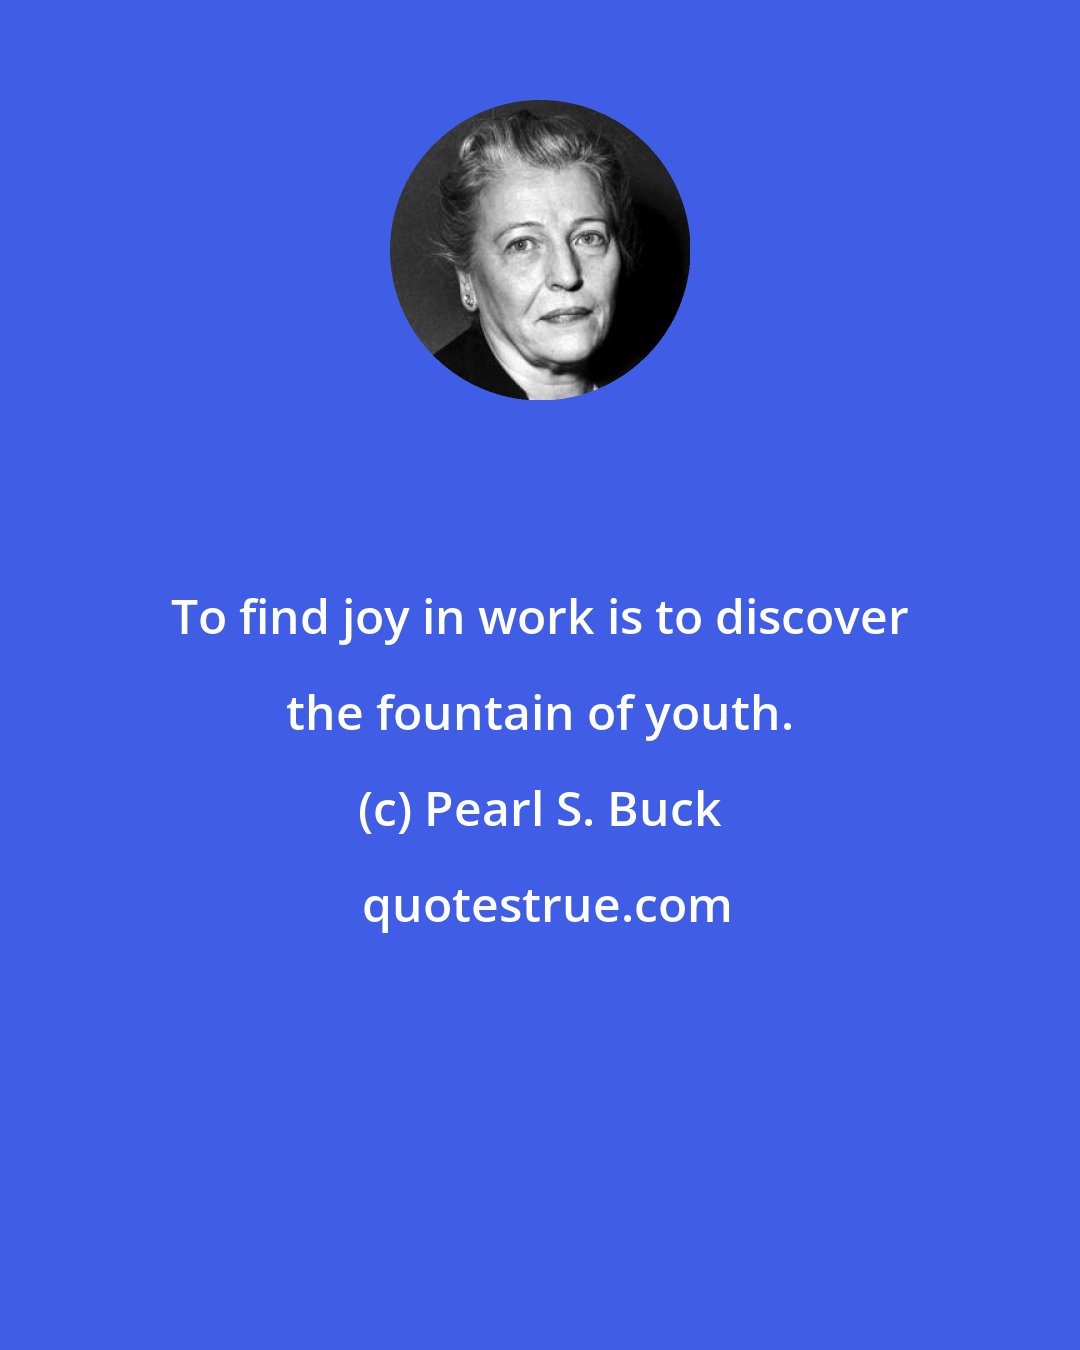 Pearl S. Buck: To find joy in work is to discover the fountain of youth.